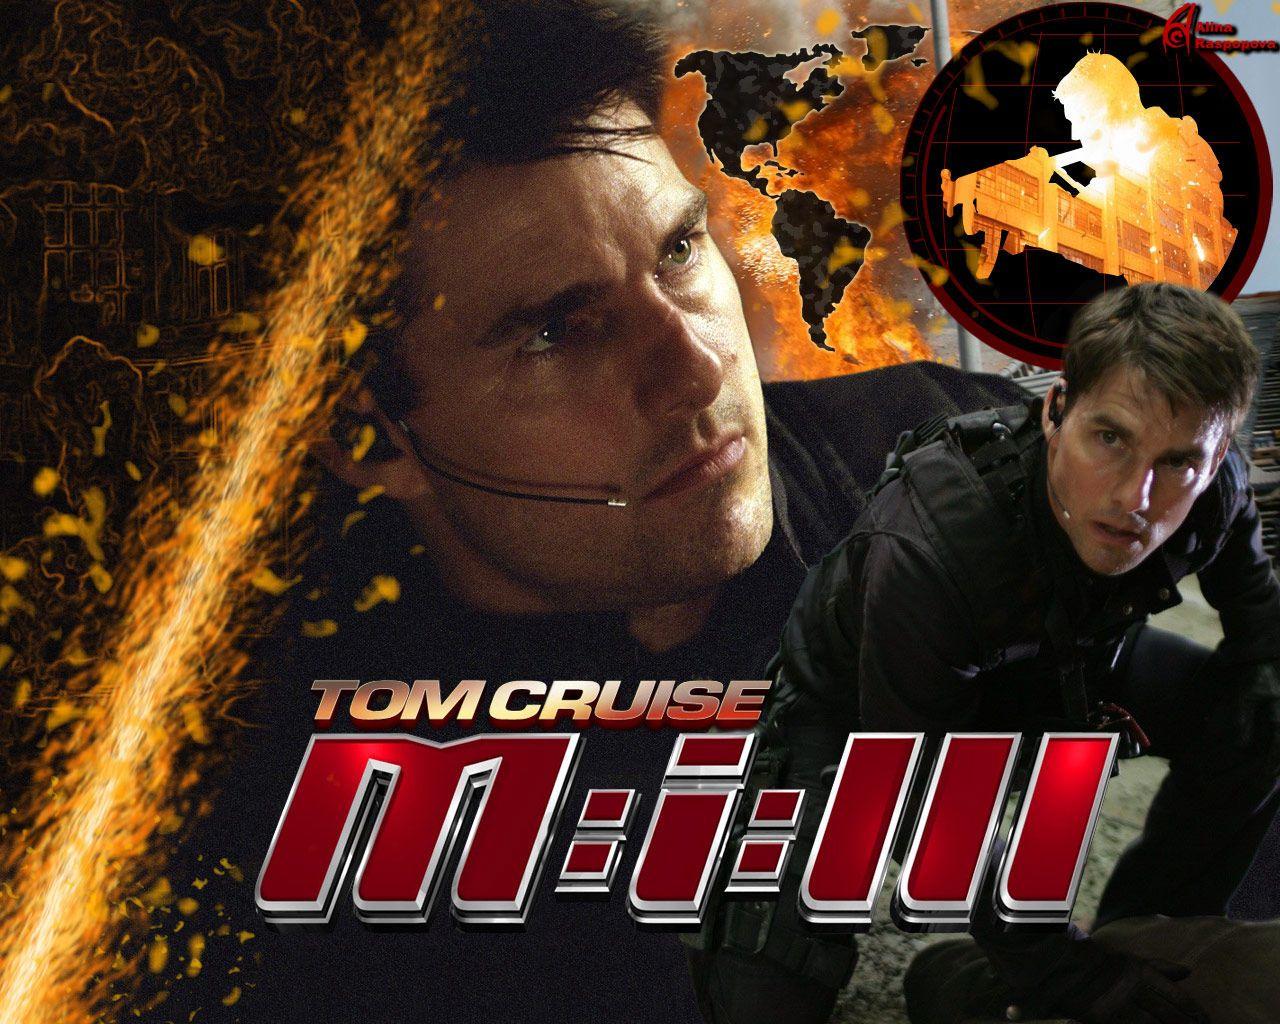 Image Mission: Impossible Mission: Impossible III film